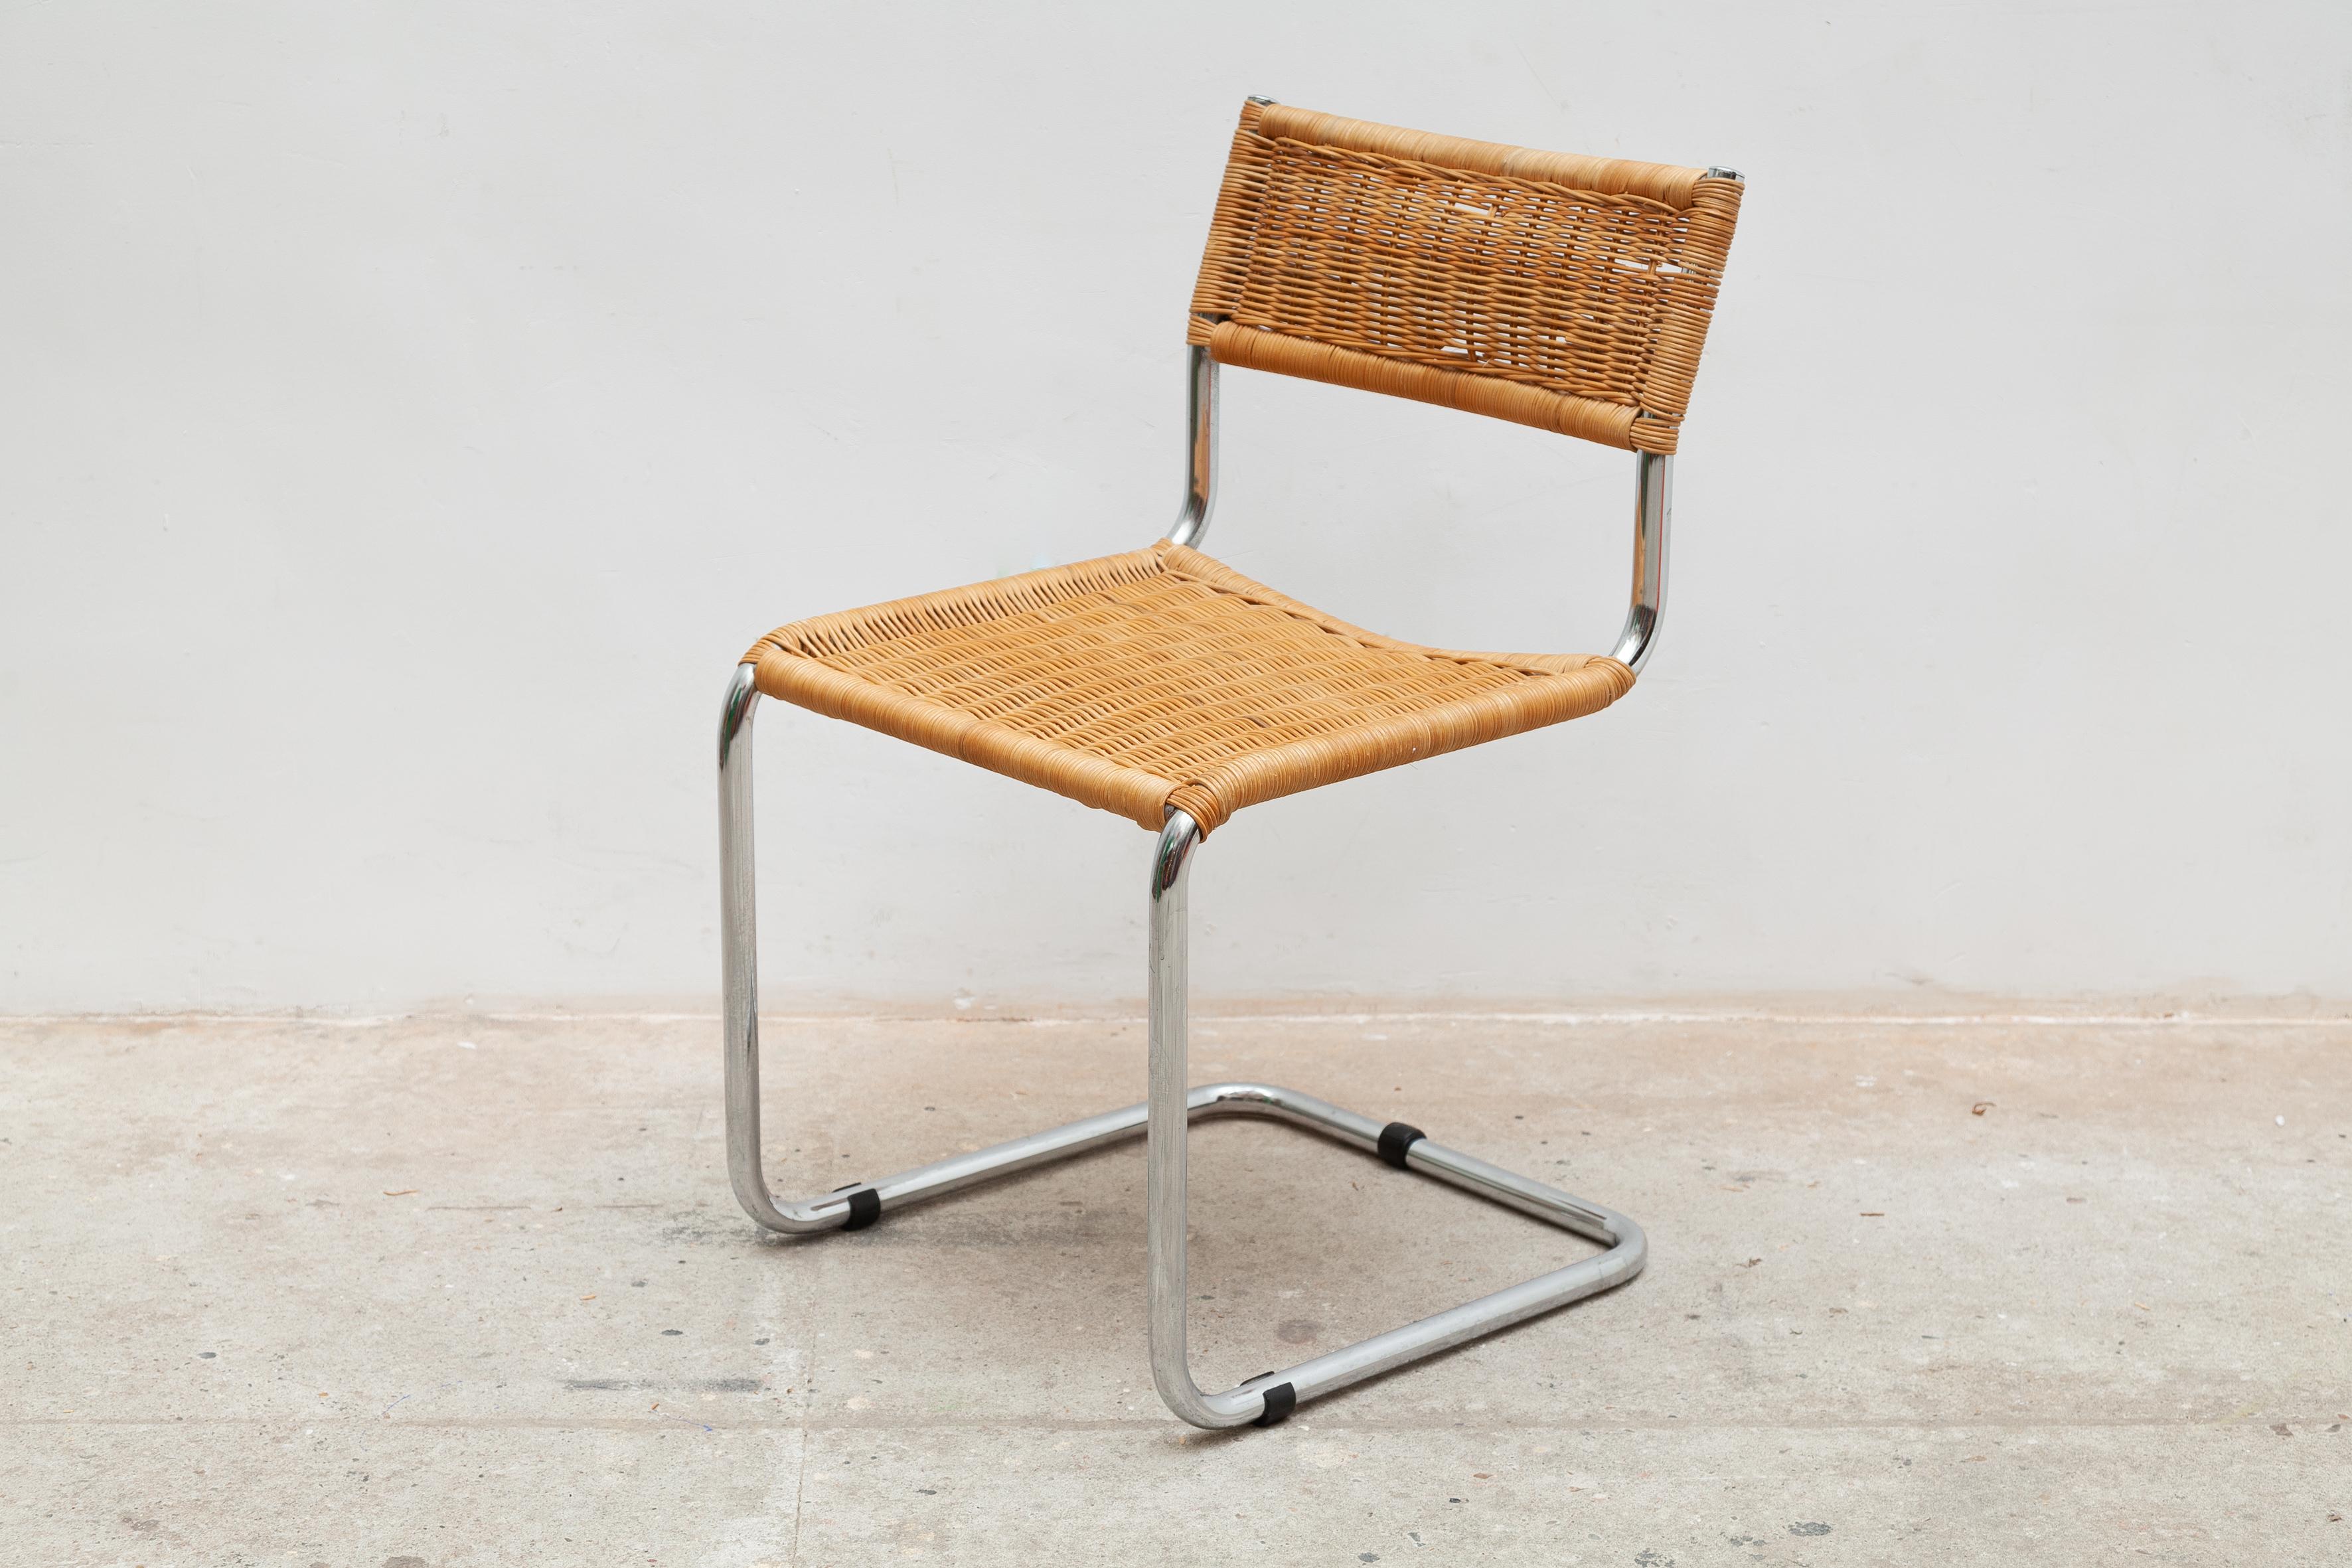 This pair of chairs was made in the 60s. It consist of a tubular chrome structure with cantilever base.The seat and the back are in woven rattan.
A pretty classic reminiscent of the Cesca B32 model by Hungarian designer Marcel Breuer. Functional,